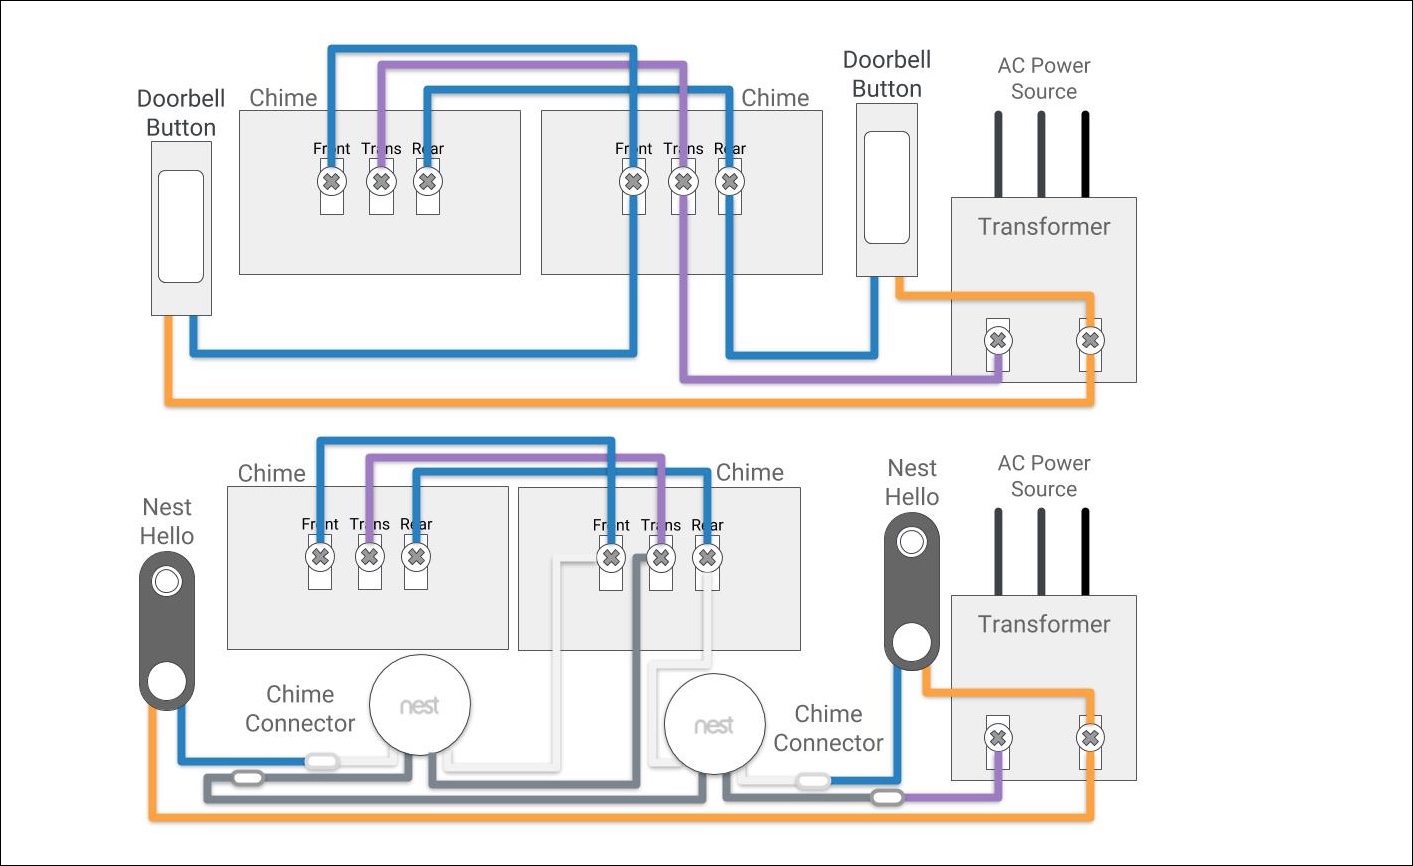 Doorbell Wiring Diagram One Chime from storage.googleapis.com